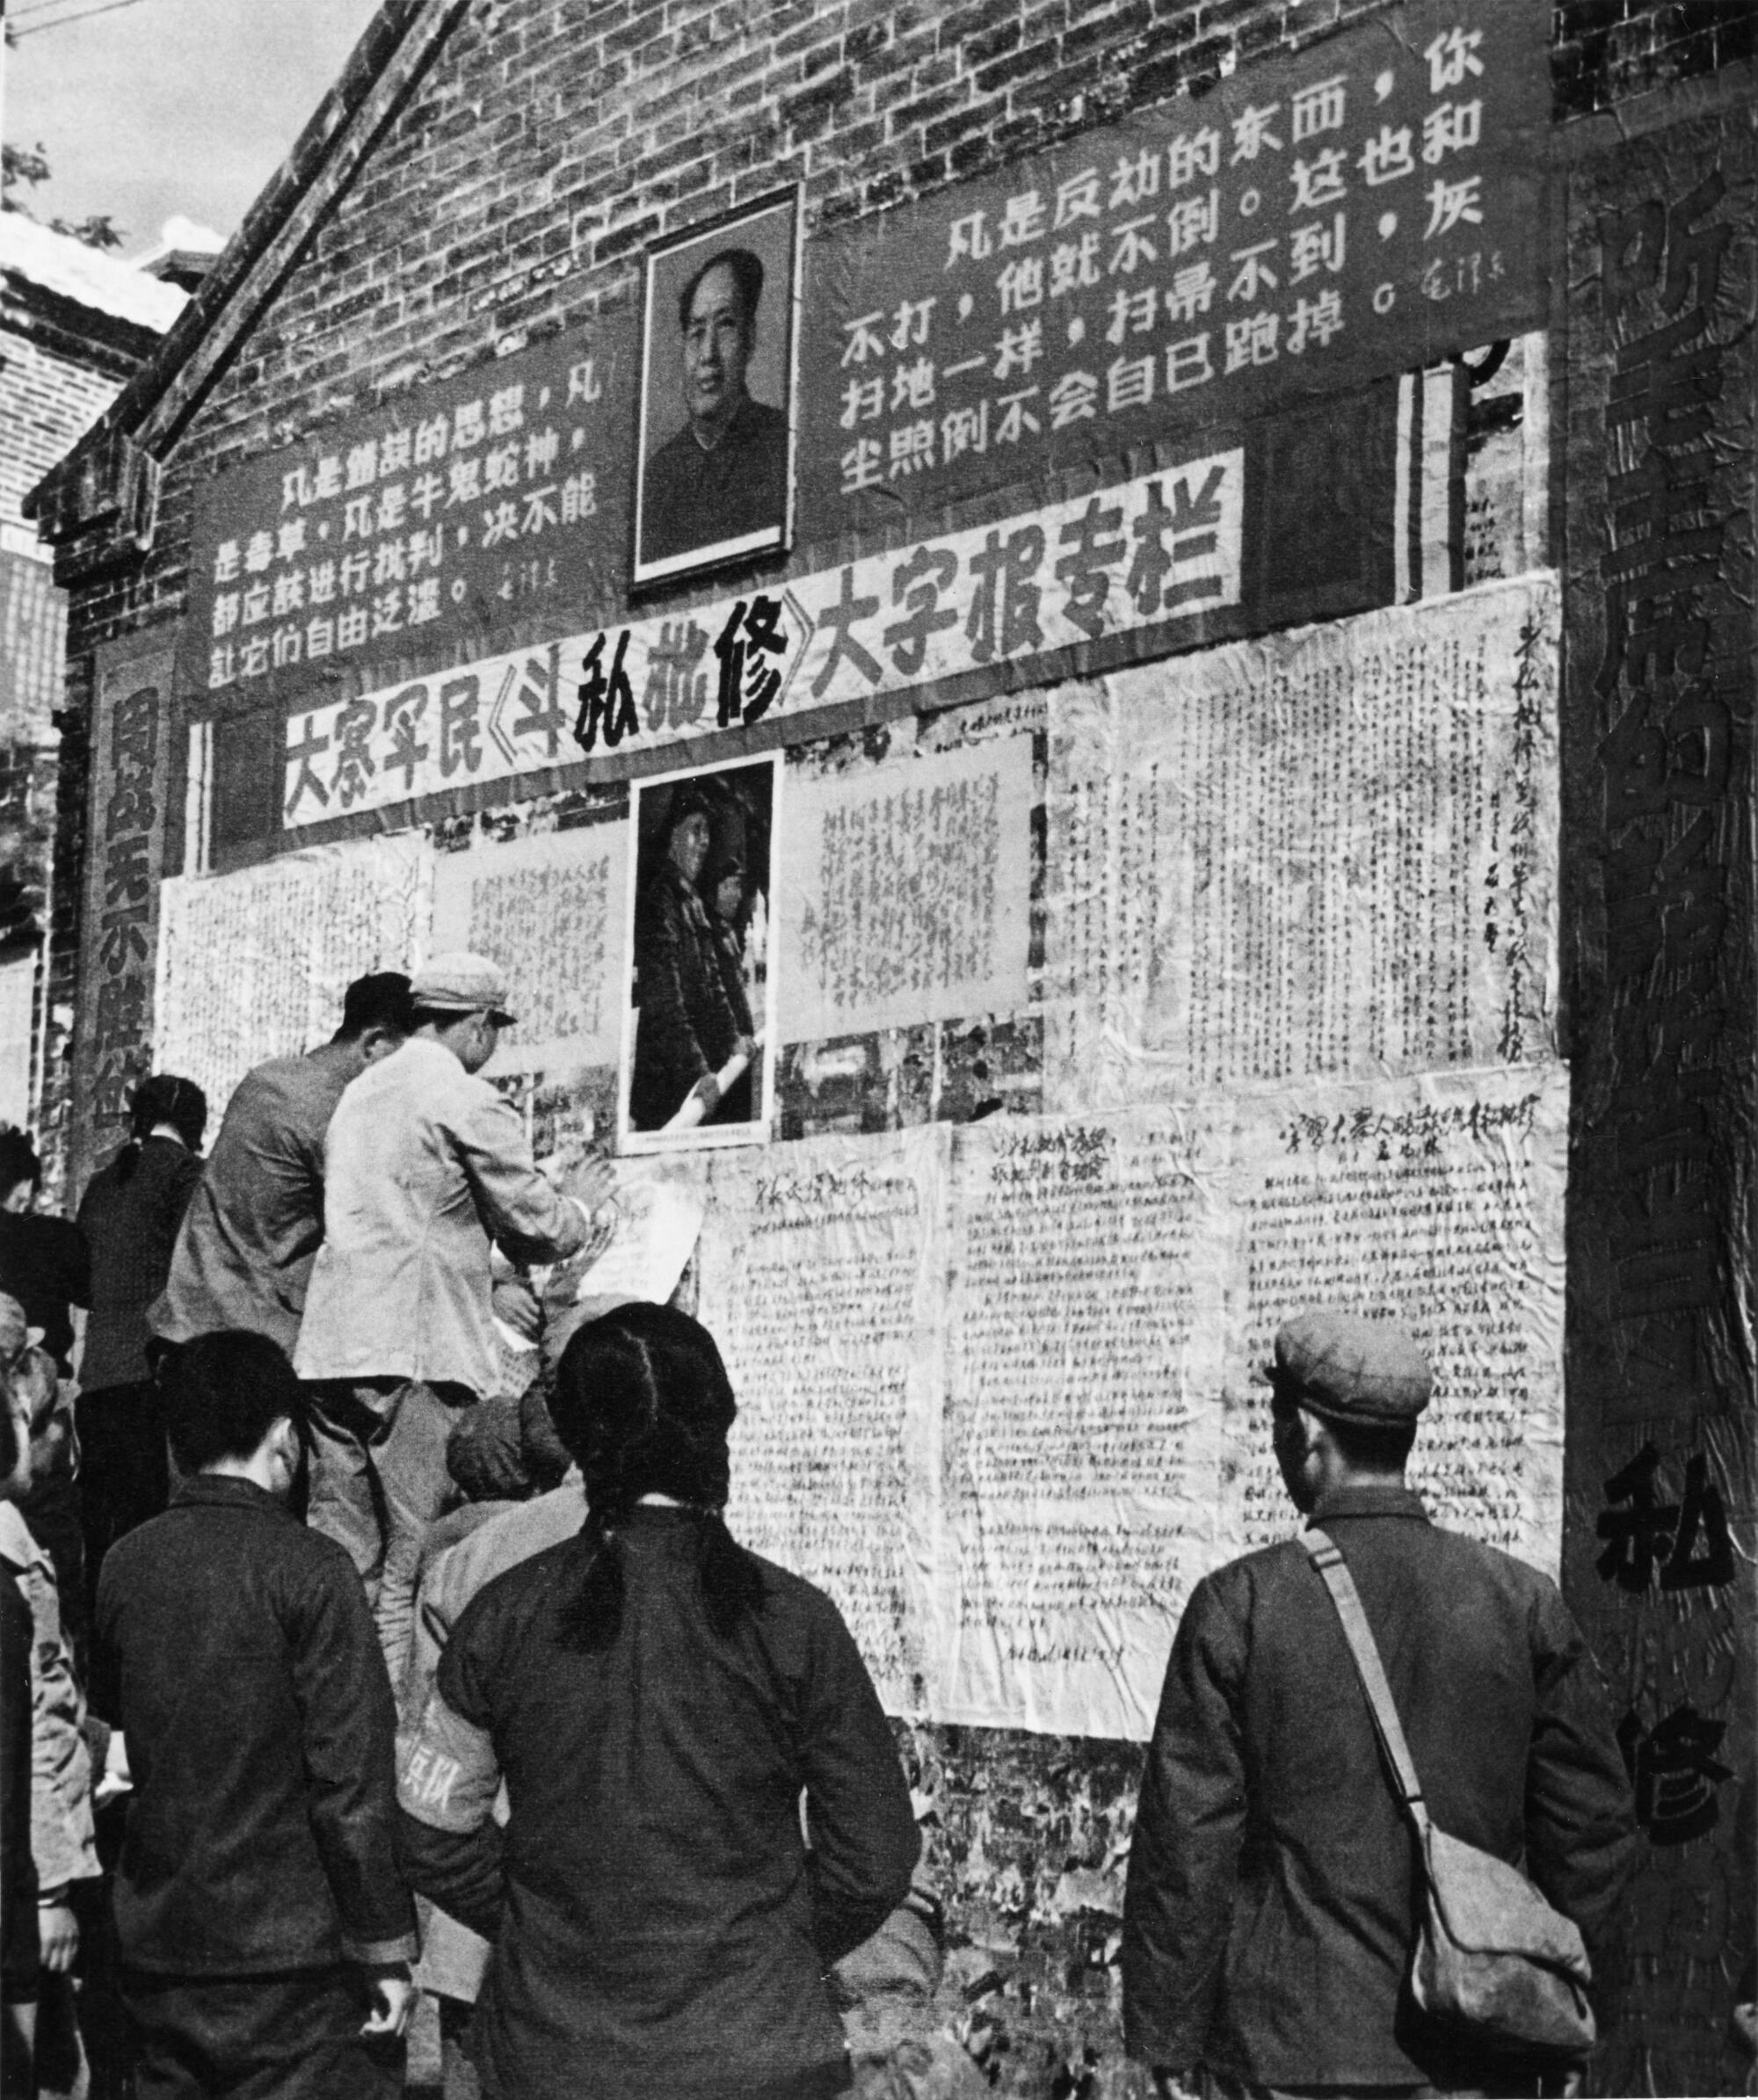 "Big character posters" are put up by peasants and soldiers, circa 1970.